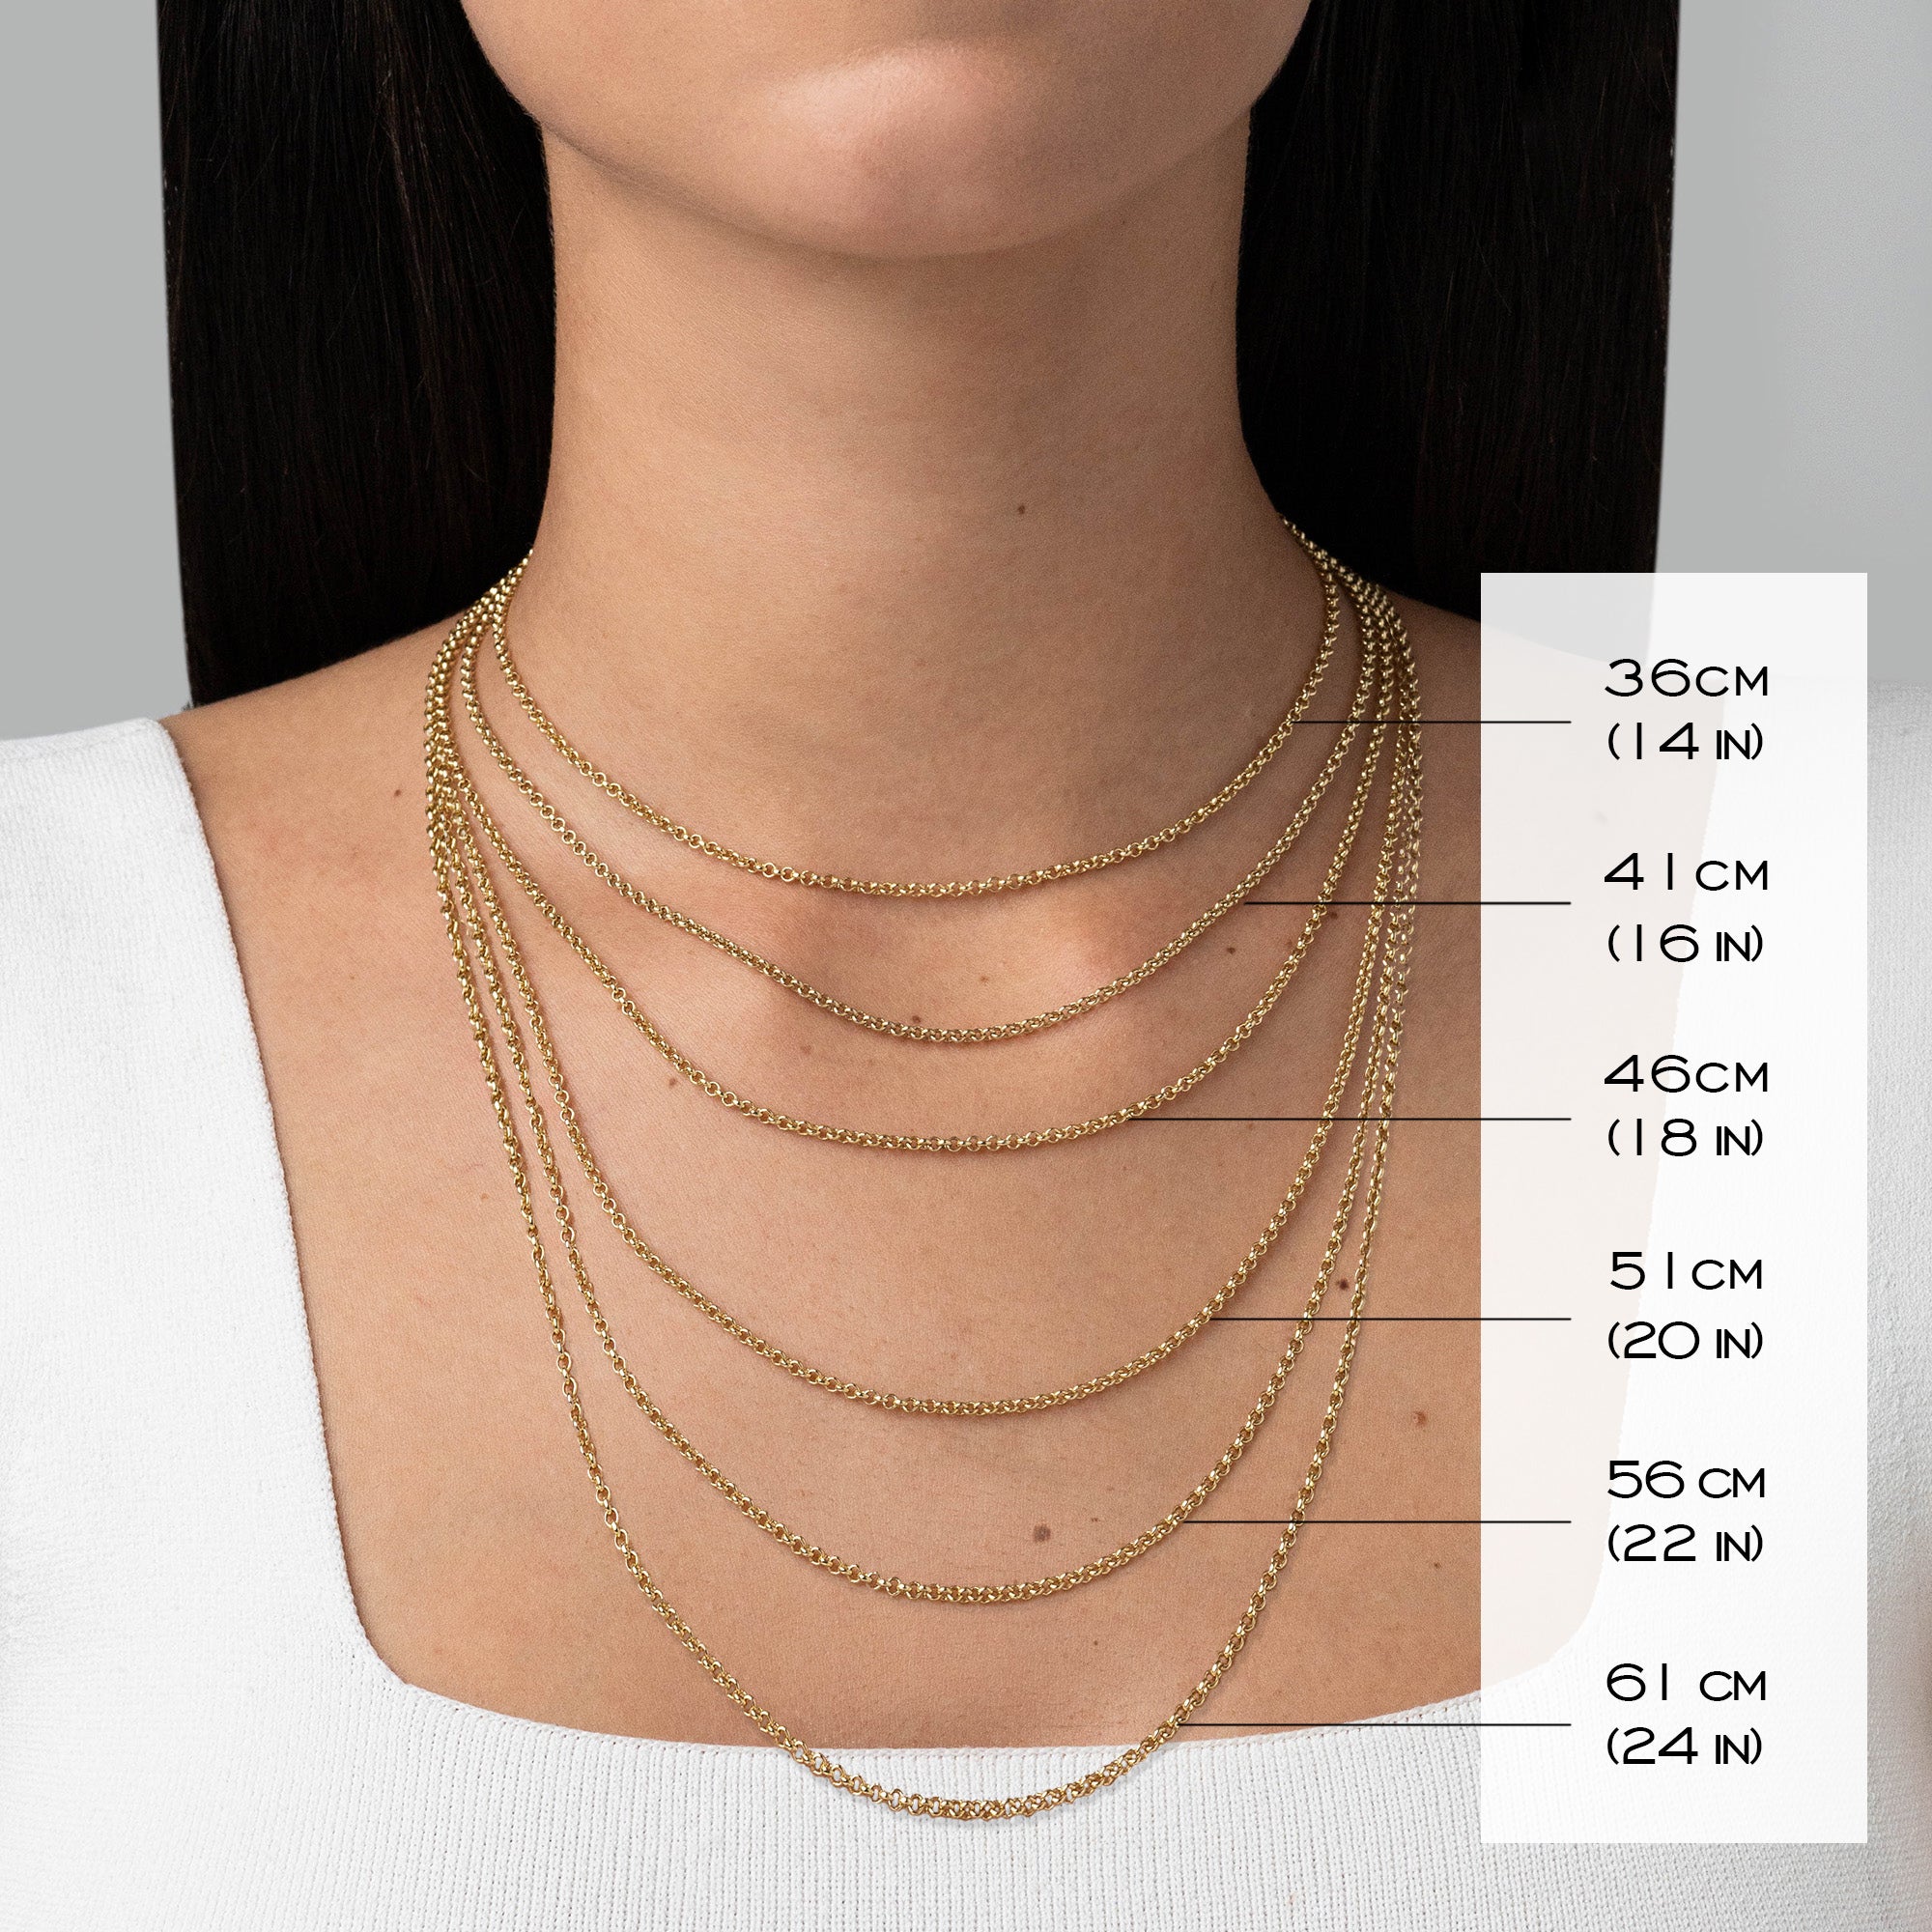 886 Royal Mint Necklaces 886 Square Trace Chain in 9ct Yellow Gold